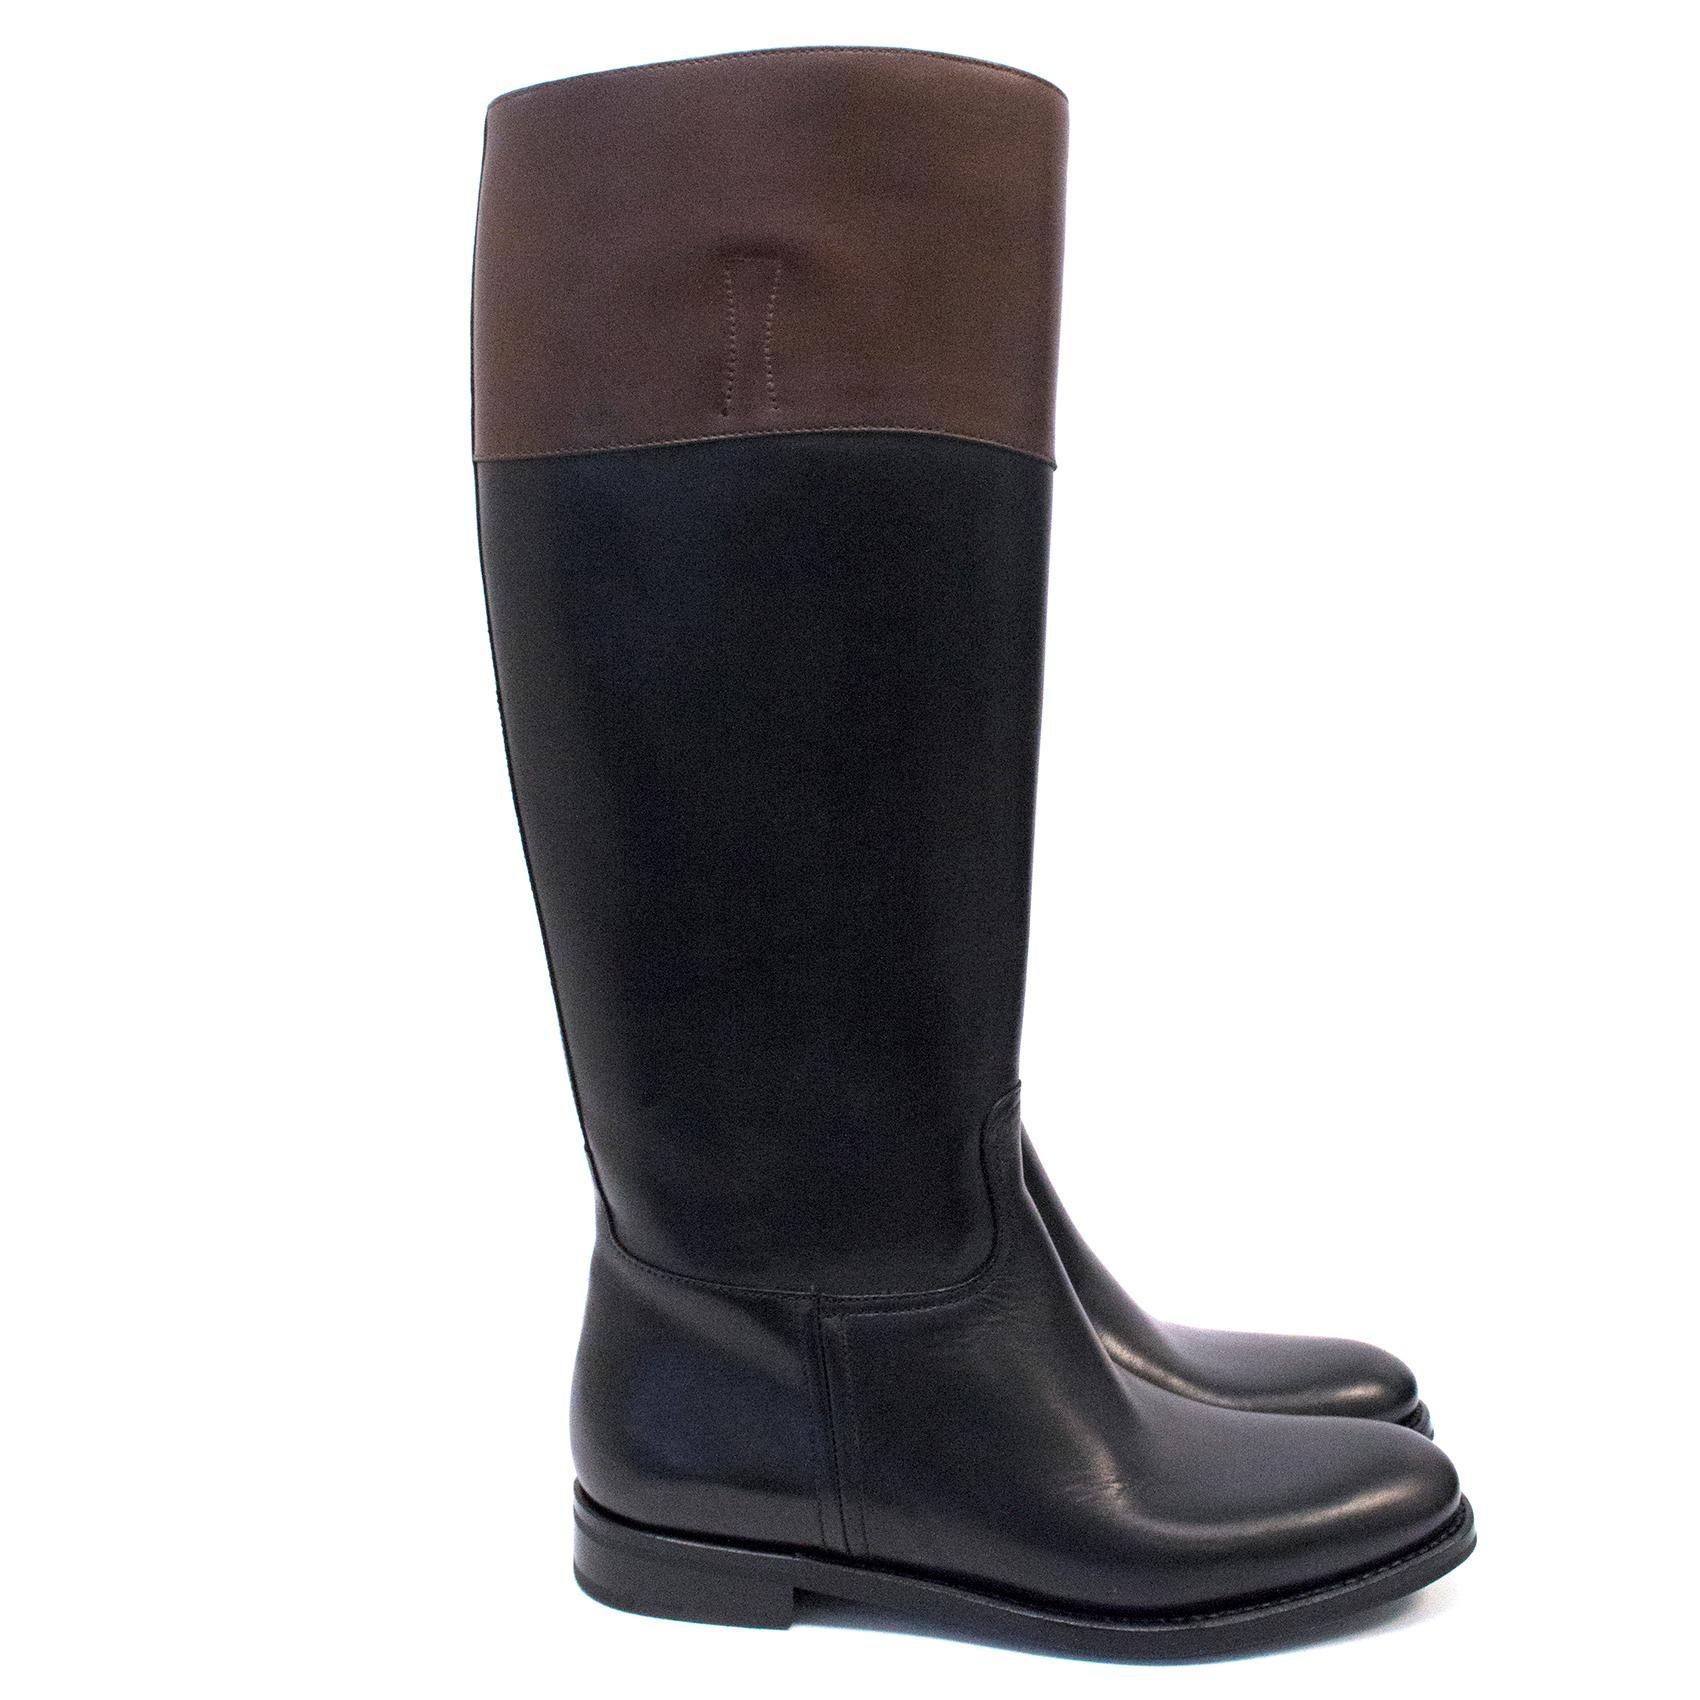 Church's black riding knee-high boots with brown upper trim.
Flat style in a pull-on style.
Almond-shaped toe.
Current collection.
Item is brand new.

Approx.

Length - 28cm

Height - 42cm

Width - 9cm